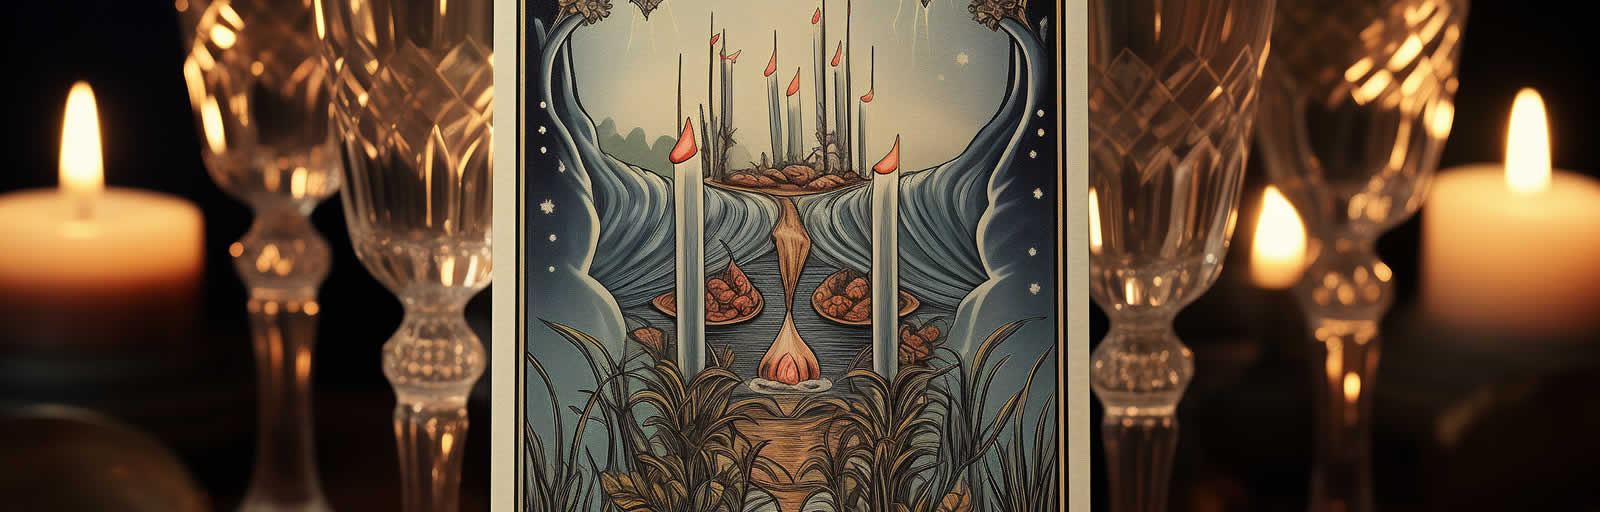 Featured image for “Ten of Cups Meaning”